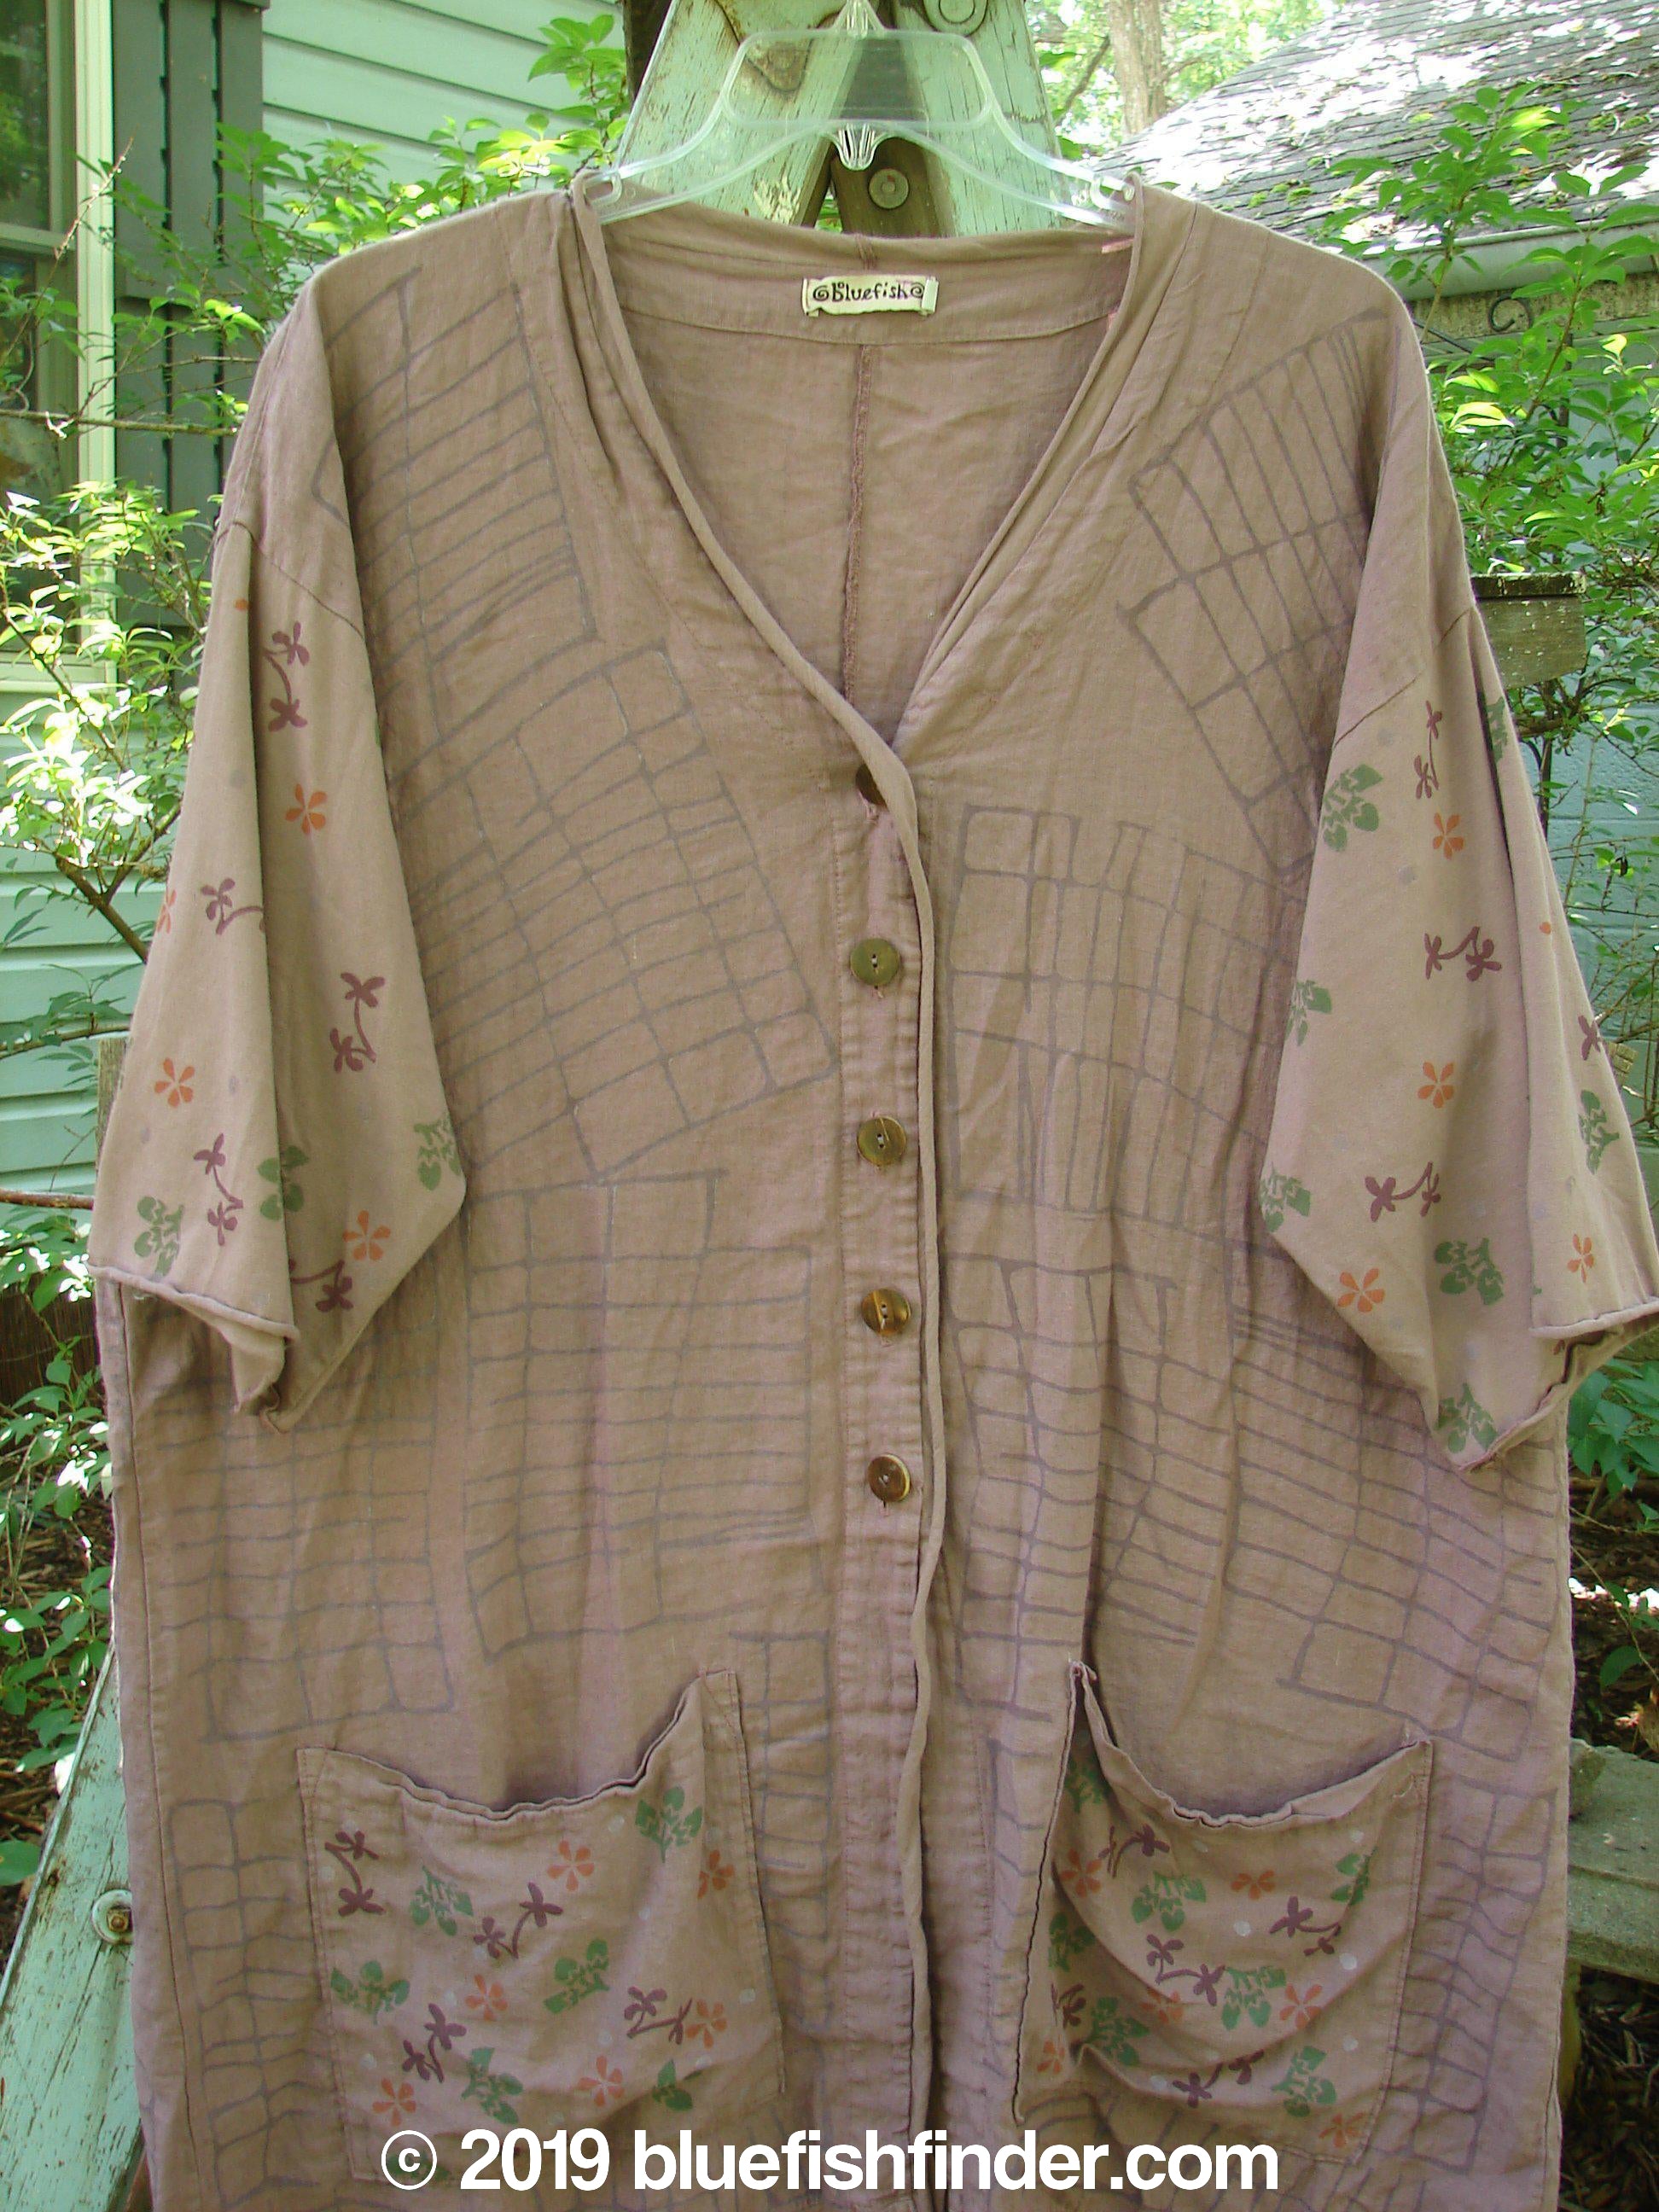 Barclay Linen Cotton Sleeve Pocket Cardigan in Rich Mauve, Size 0. A brown shirt with a map design on it, featuring a pocket with flowers and leaves.